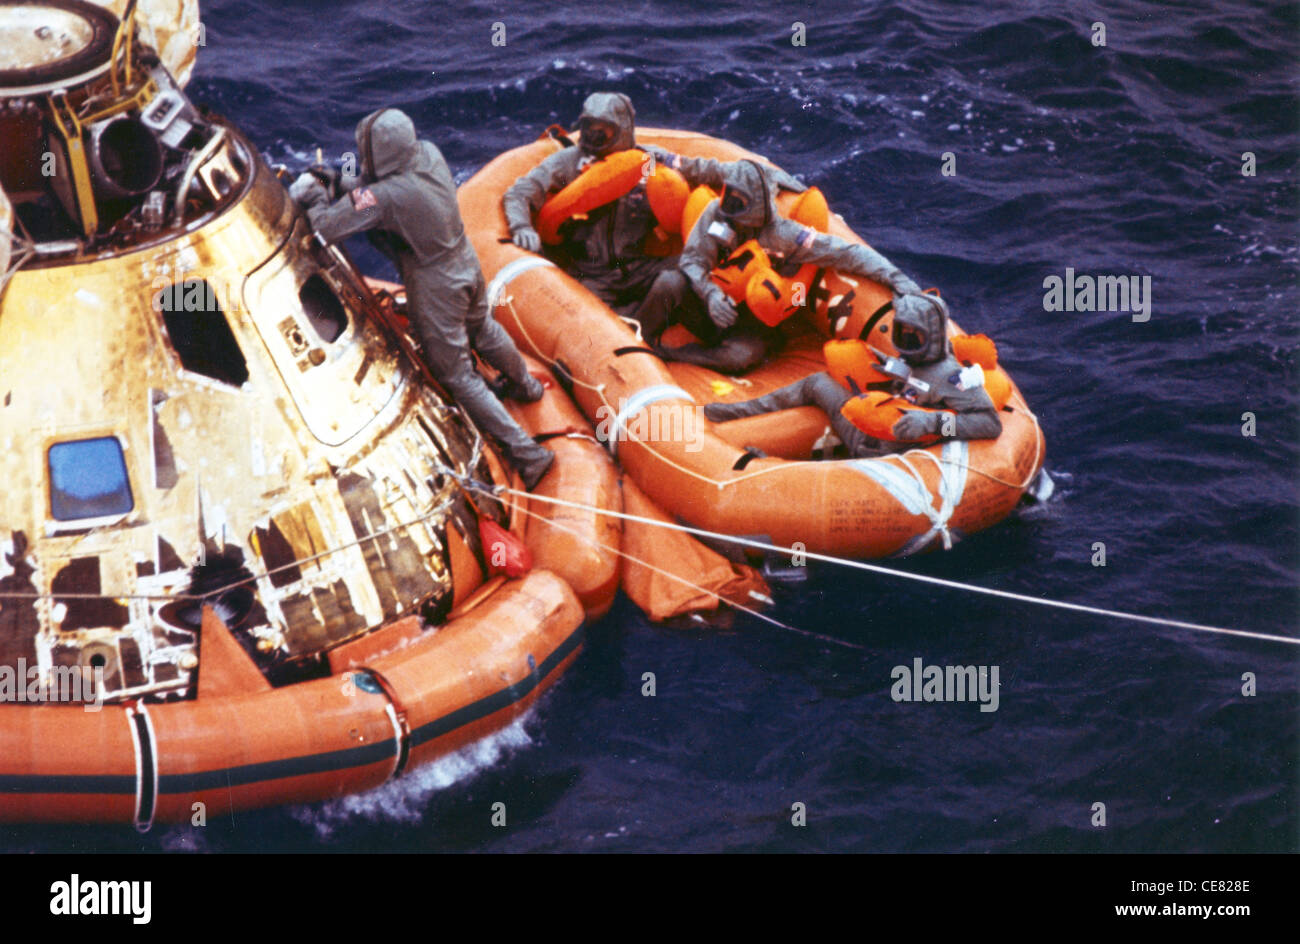 First Lt. Clancy Hatleberg closes the Apollo 11 spacecraft hatch as astronauts Neil Armstrong, Michael Collins and Buzz Aldrin, Jr. await helicopter pickup from their life raft in 1969. The command module moved from Patrick Air Force Base, Fla. for refurbishment was used by pararescuemen to train for both the Apollo and Skylab programs. The 920th Rescue Wing provides emergency medical, rescue and recovery support for all space shuttle and rocket launches. Stock Photo